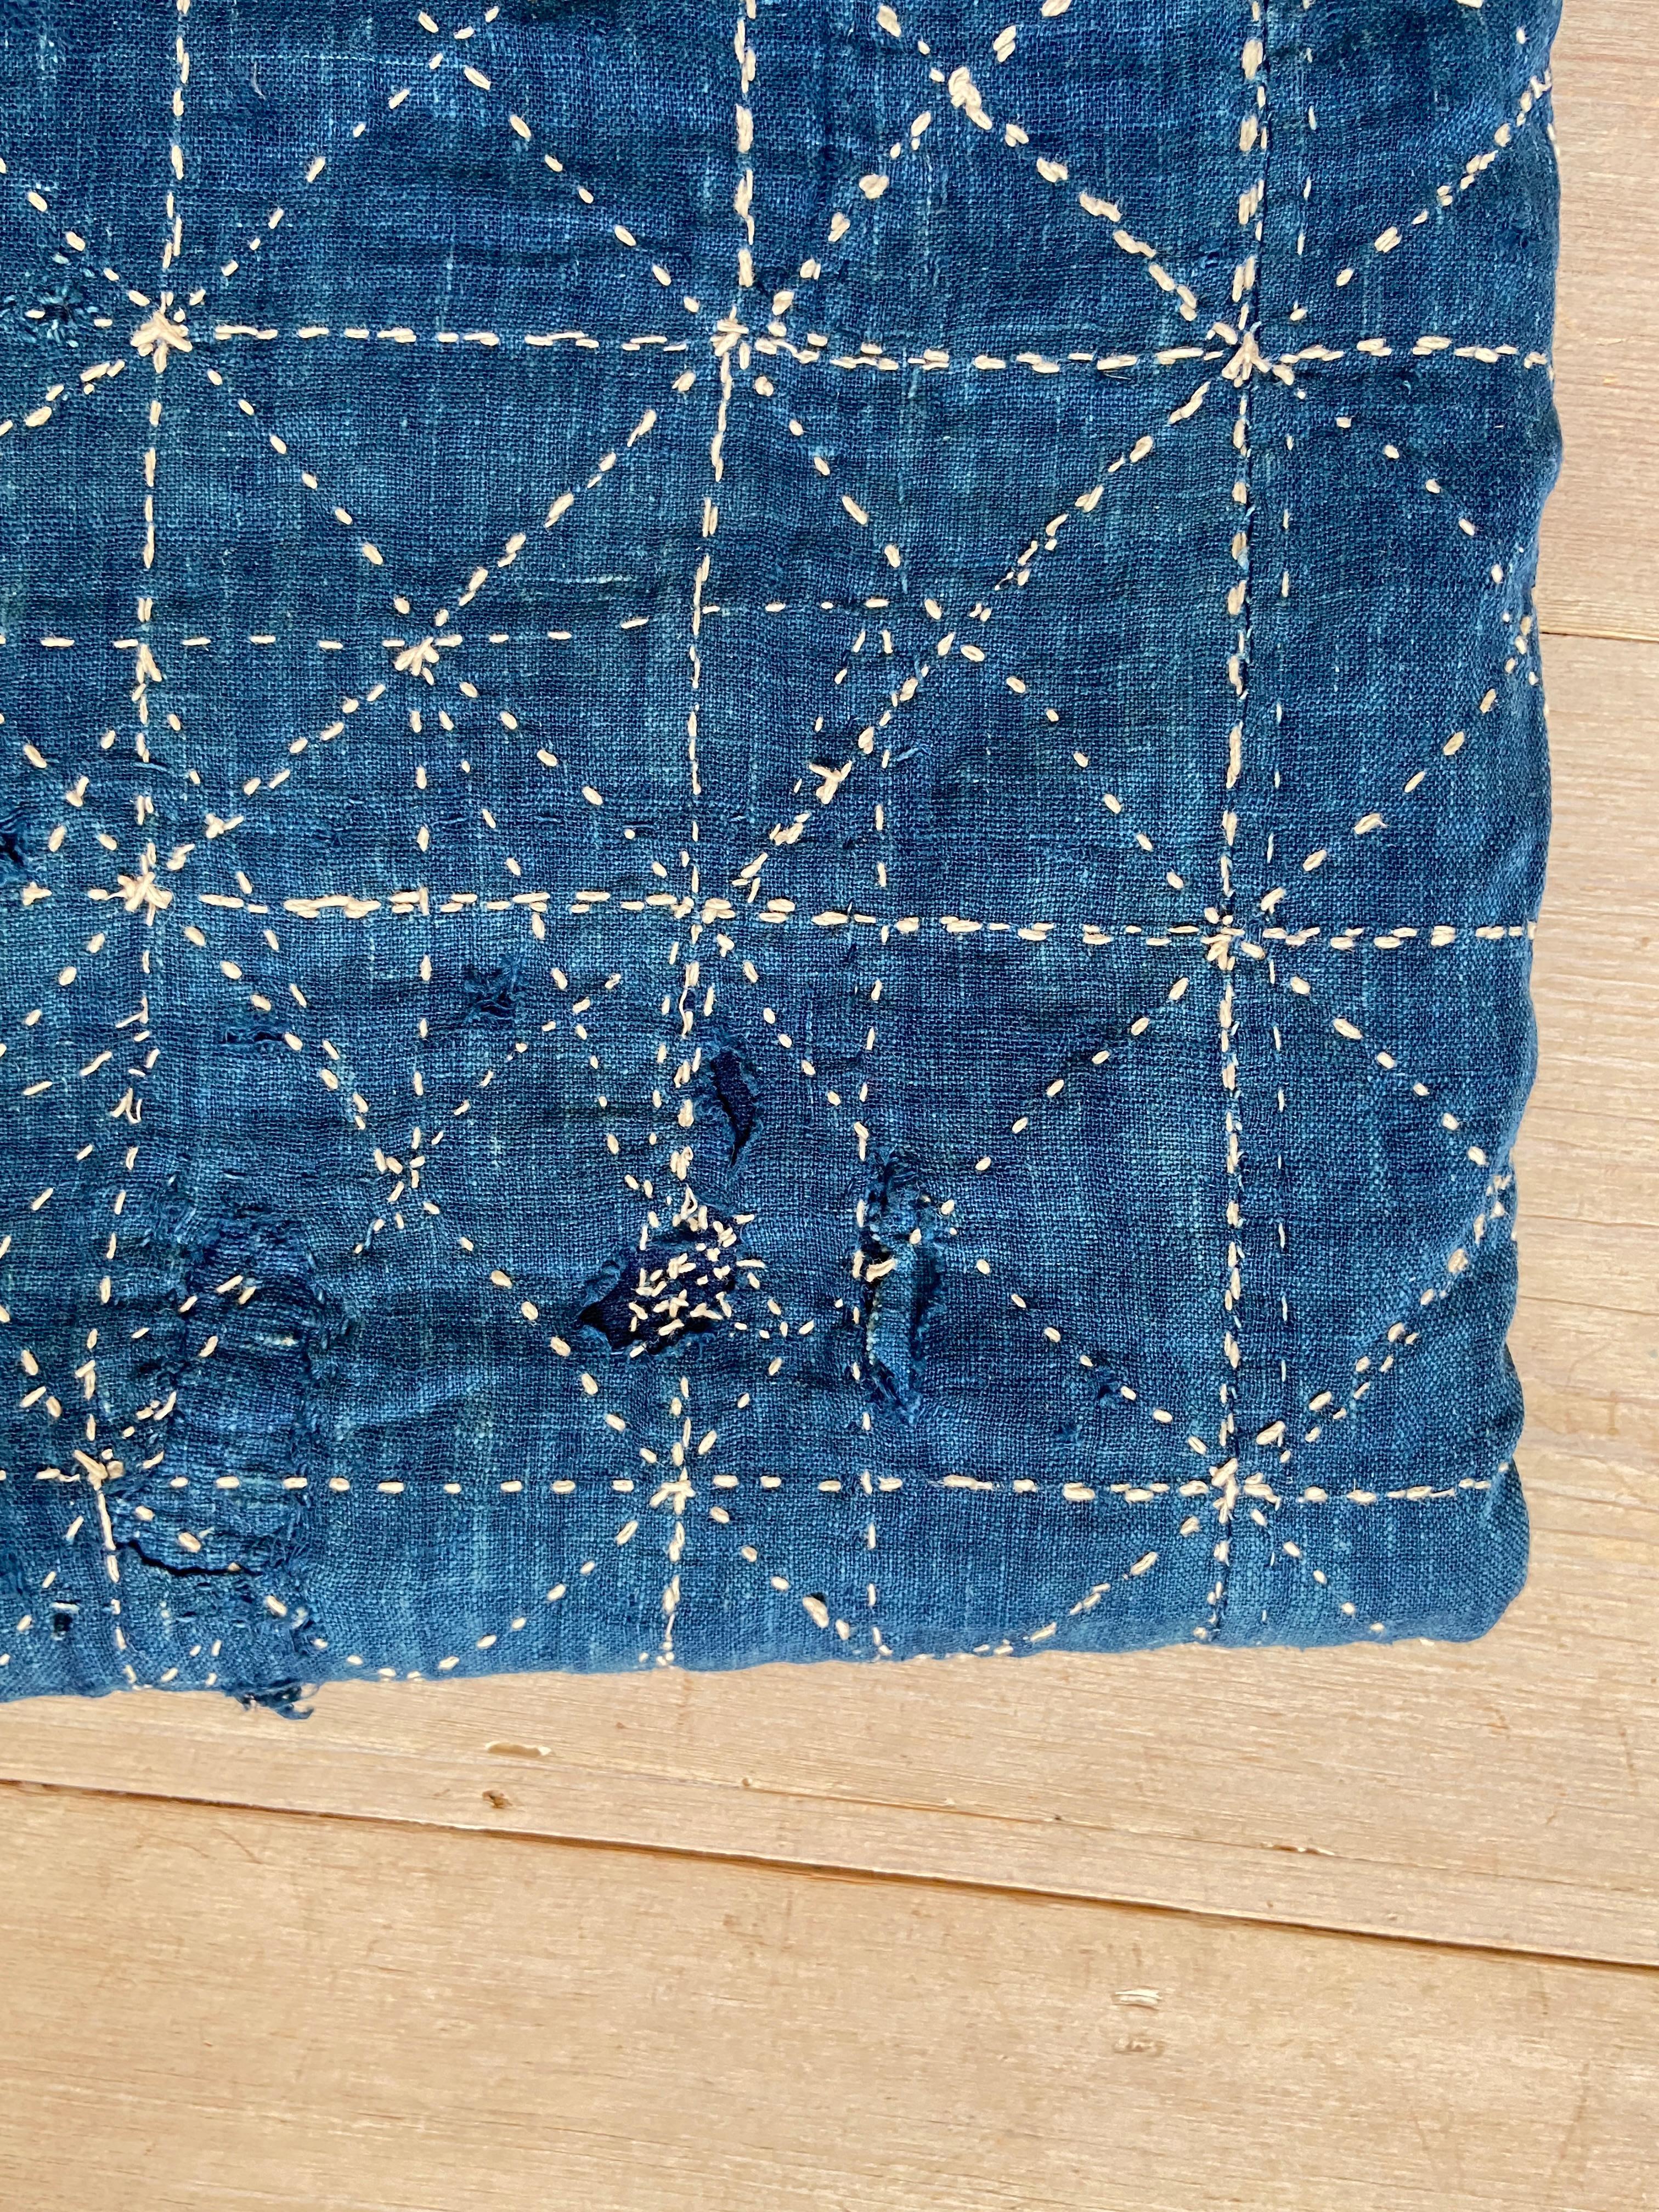 Vintage Handcrafted Patched Textile 